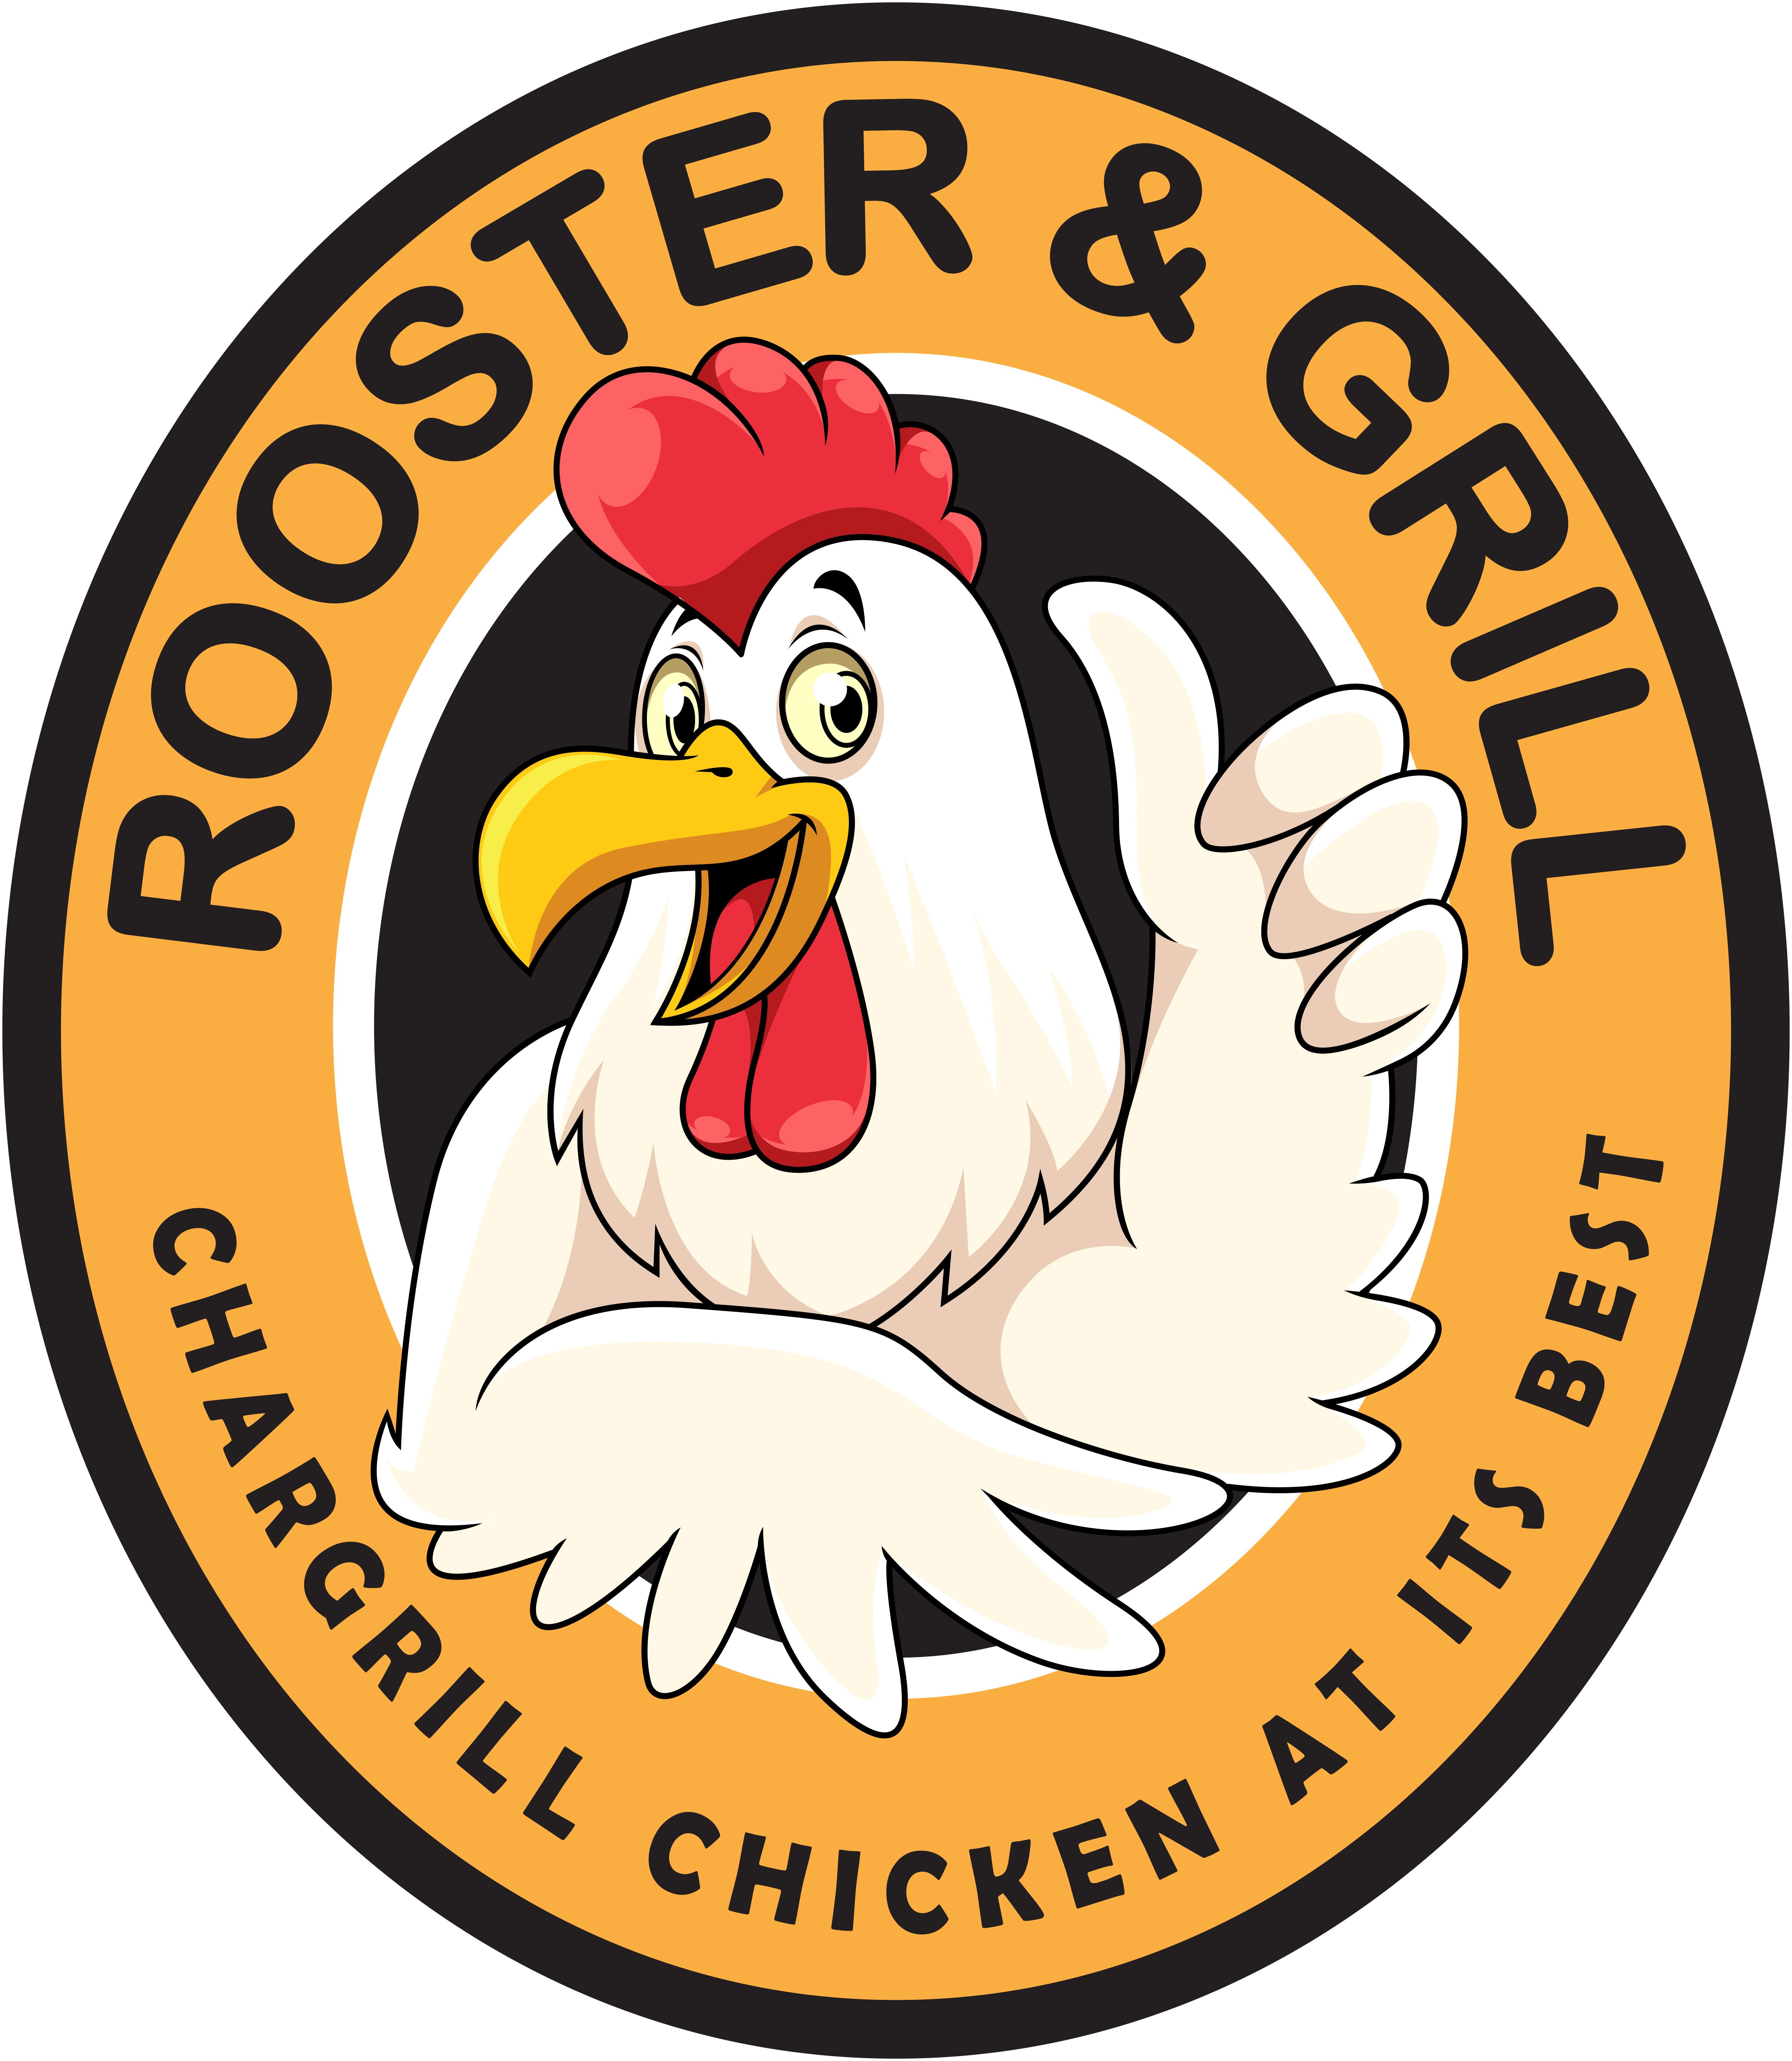 Rooster and Grill